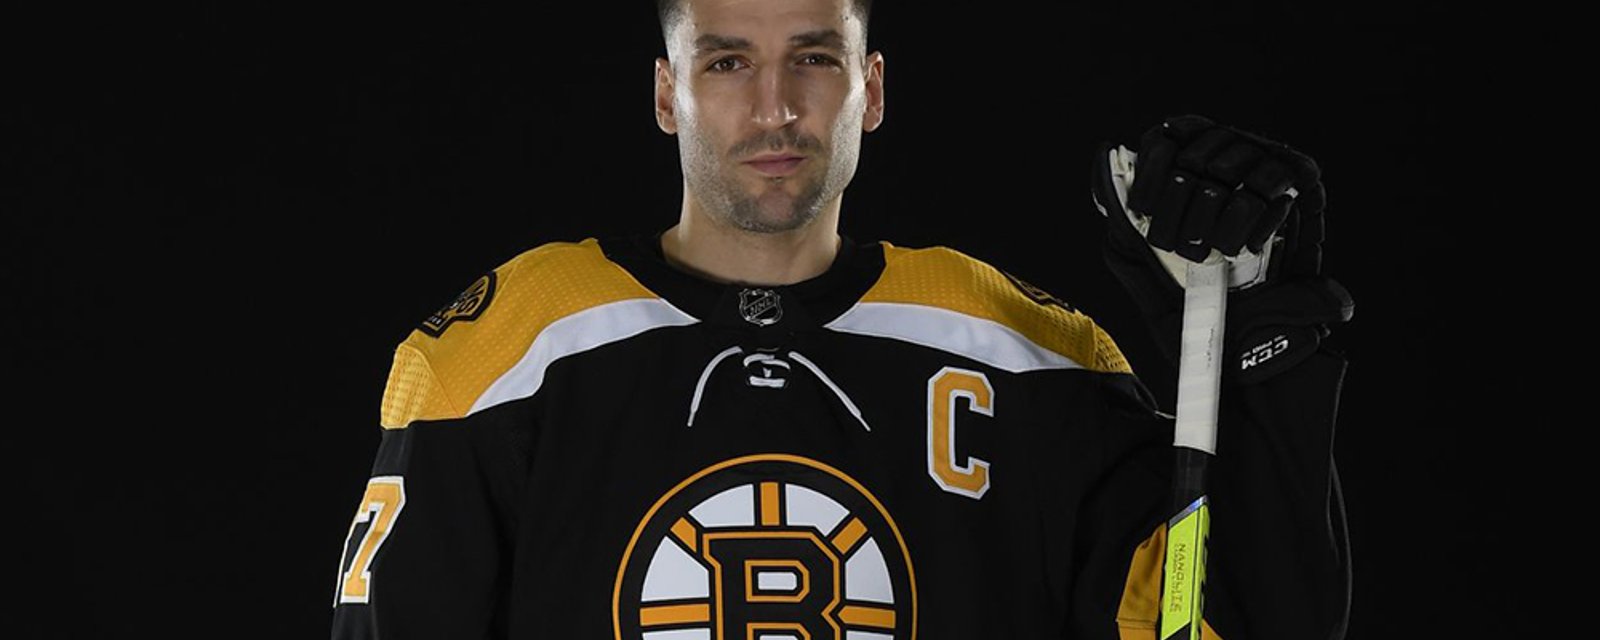 Patrice Bergeron gets immense love from his Boston Bruins teammates 